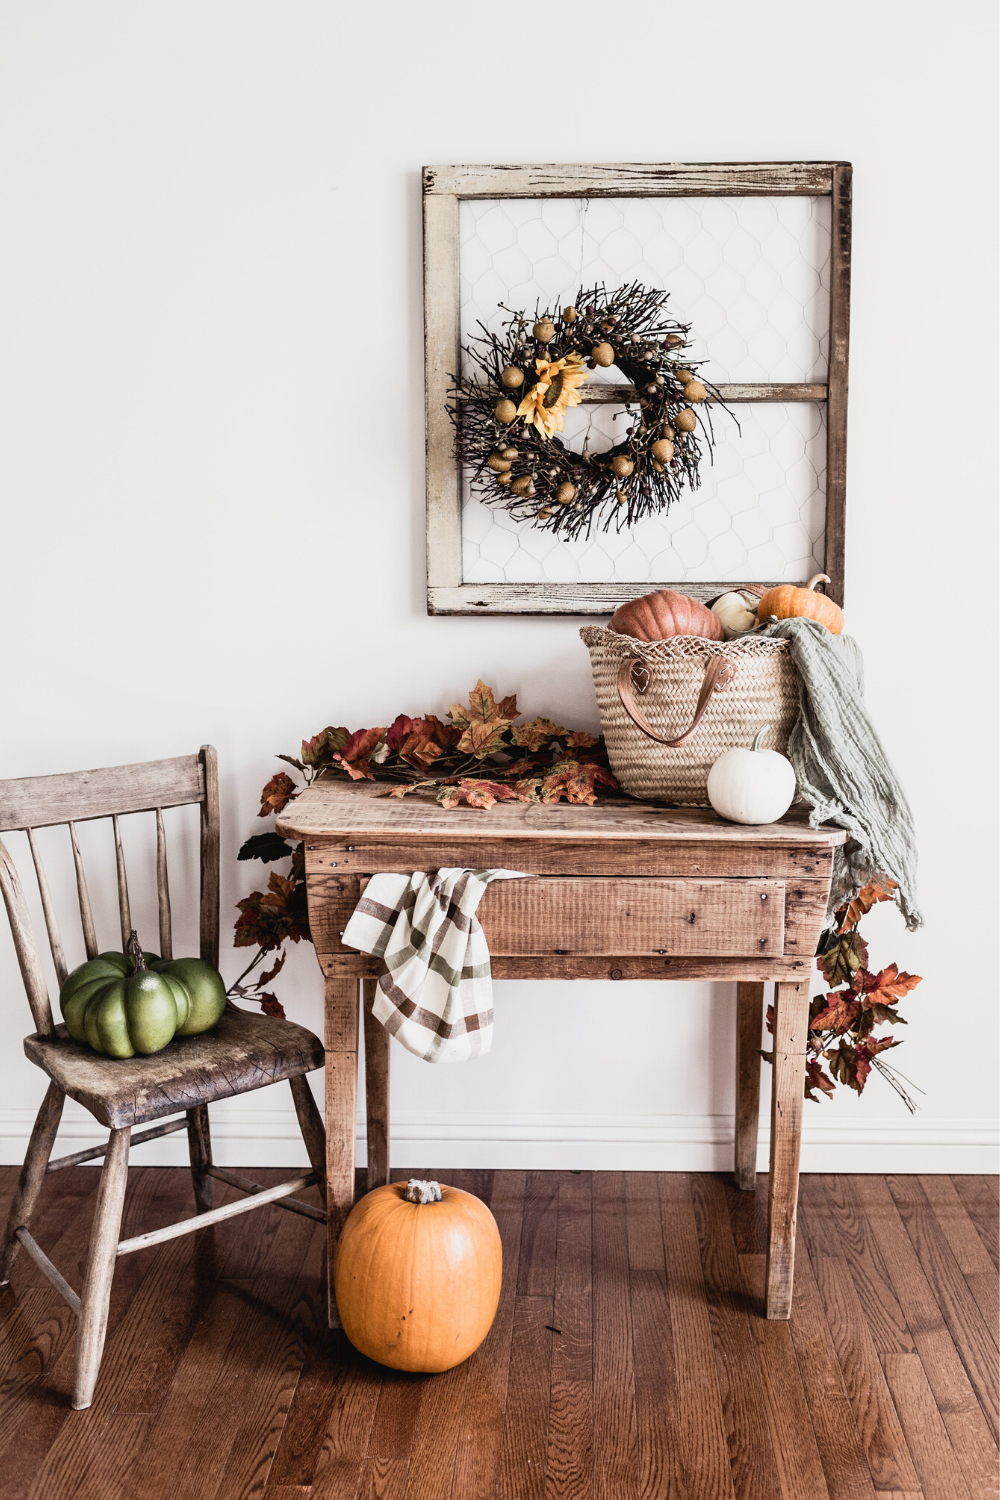 Zero waste decor is natural decor. Find out how to use nature to decorate this fall season and where to find natural decorations on Etsy to fill your home with seasonal cheer of Fall, Halloween, and Thanksgiving. Learn more at www.alittlesustainablitity.com